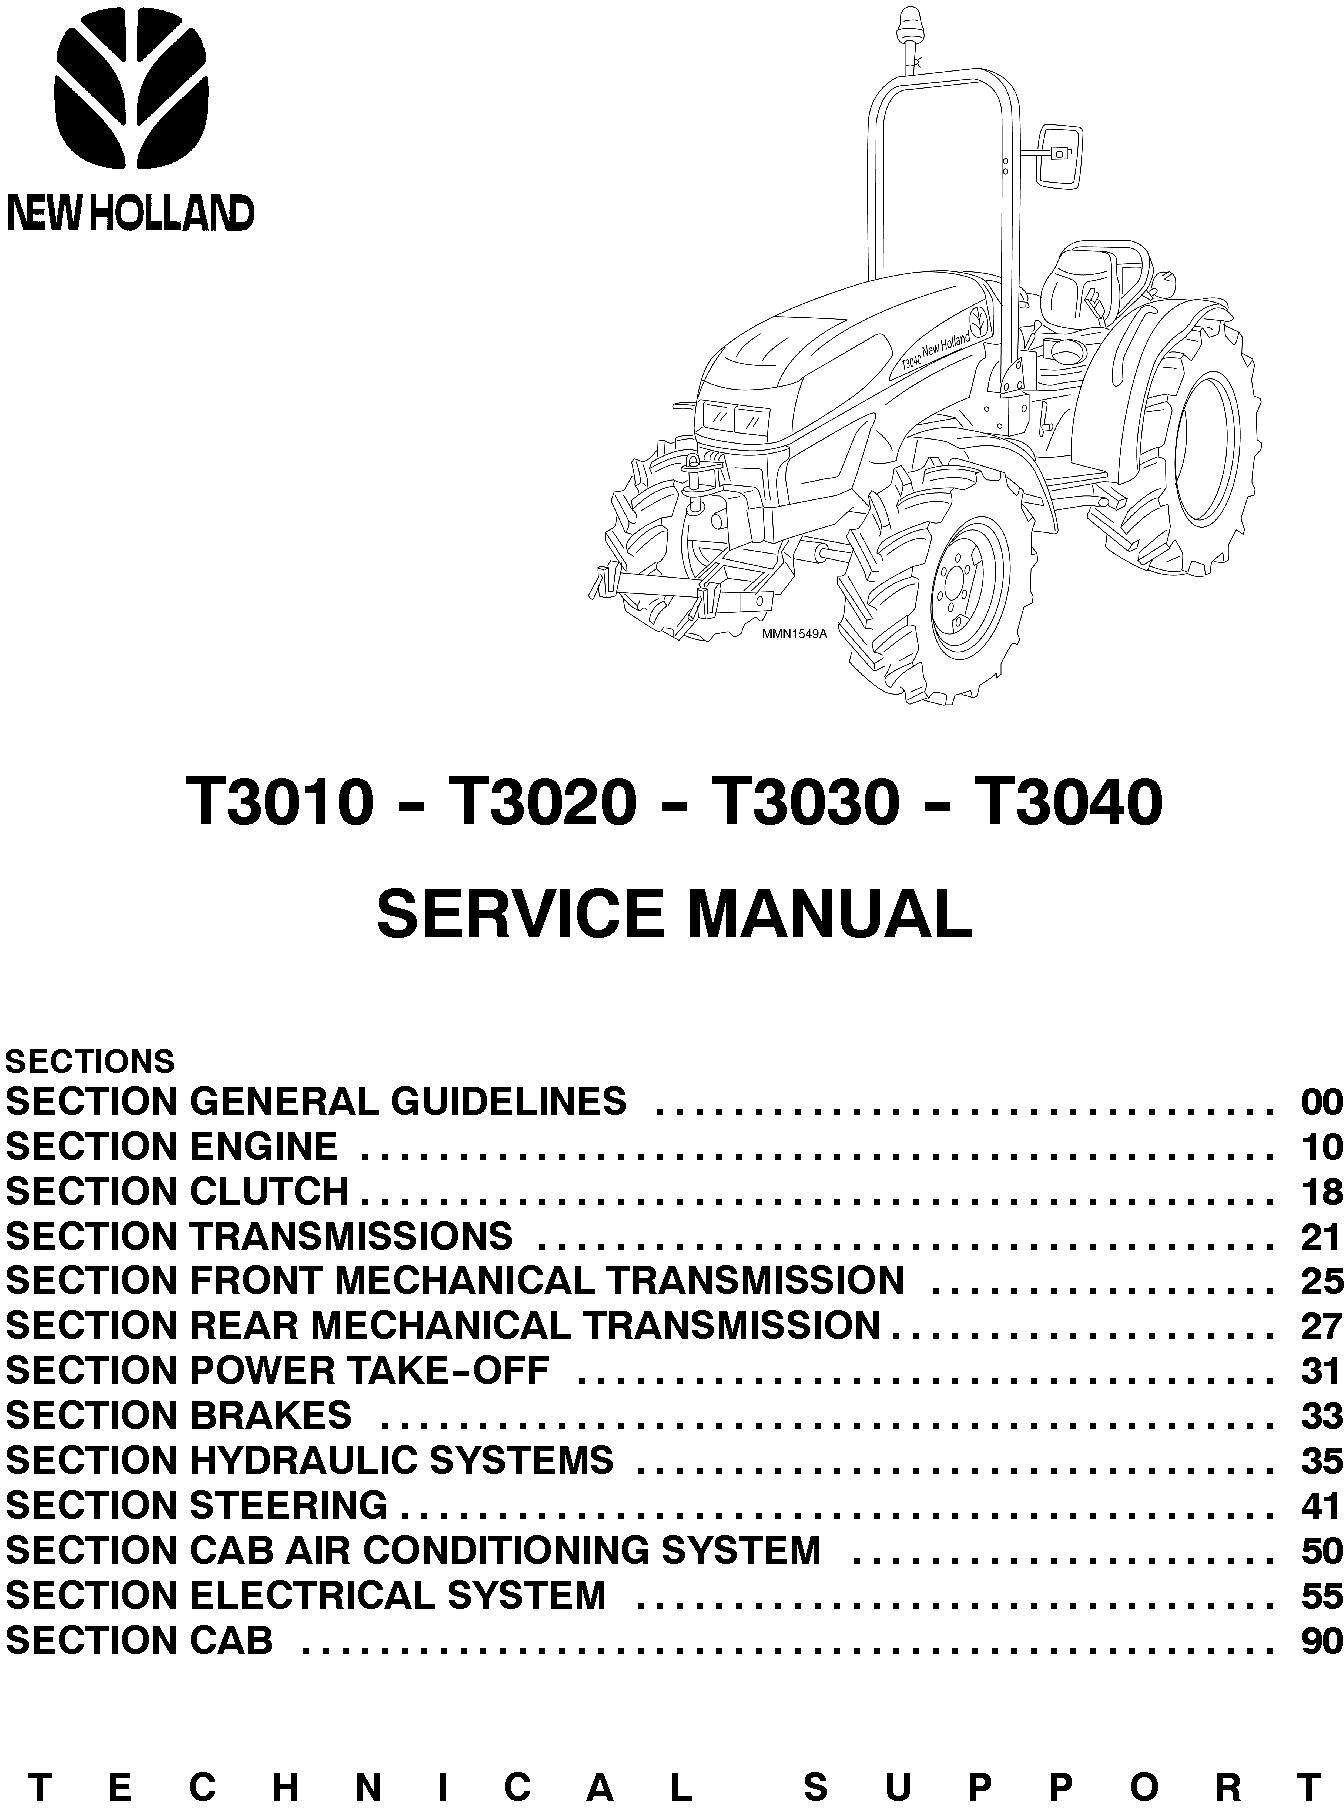 New Holland T3010, T3020, T3030, T3040 Agricultural Tractors Service Manual - 1